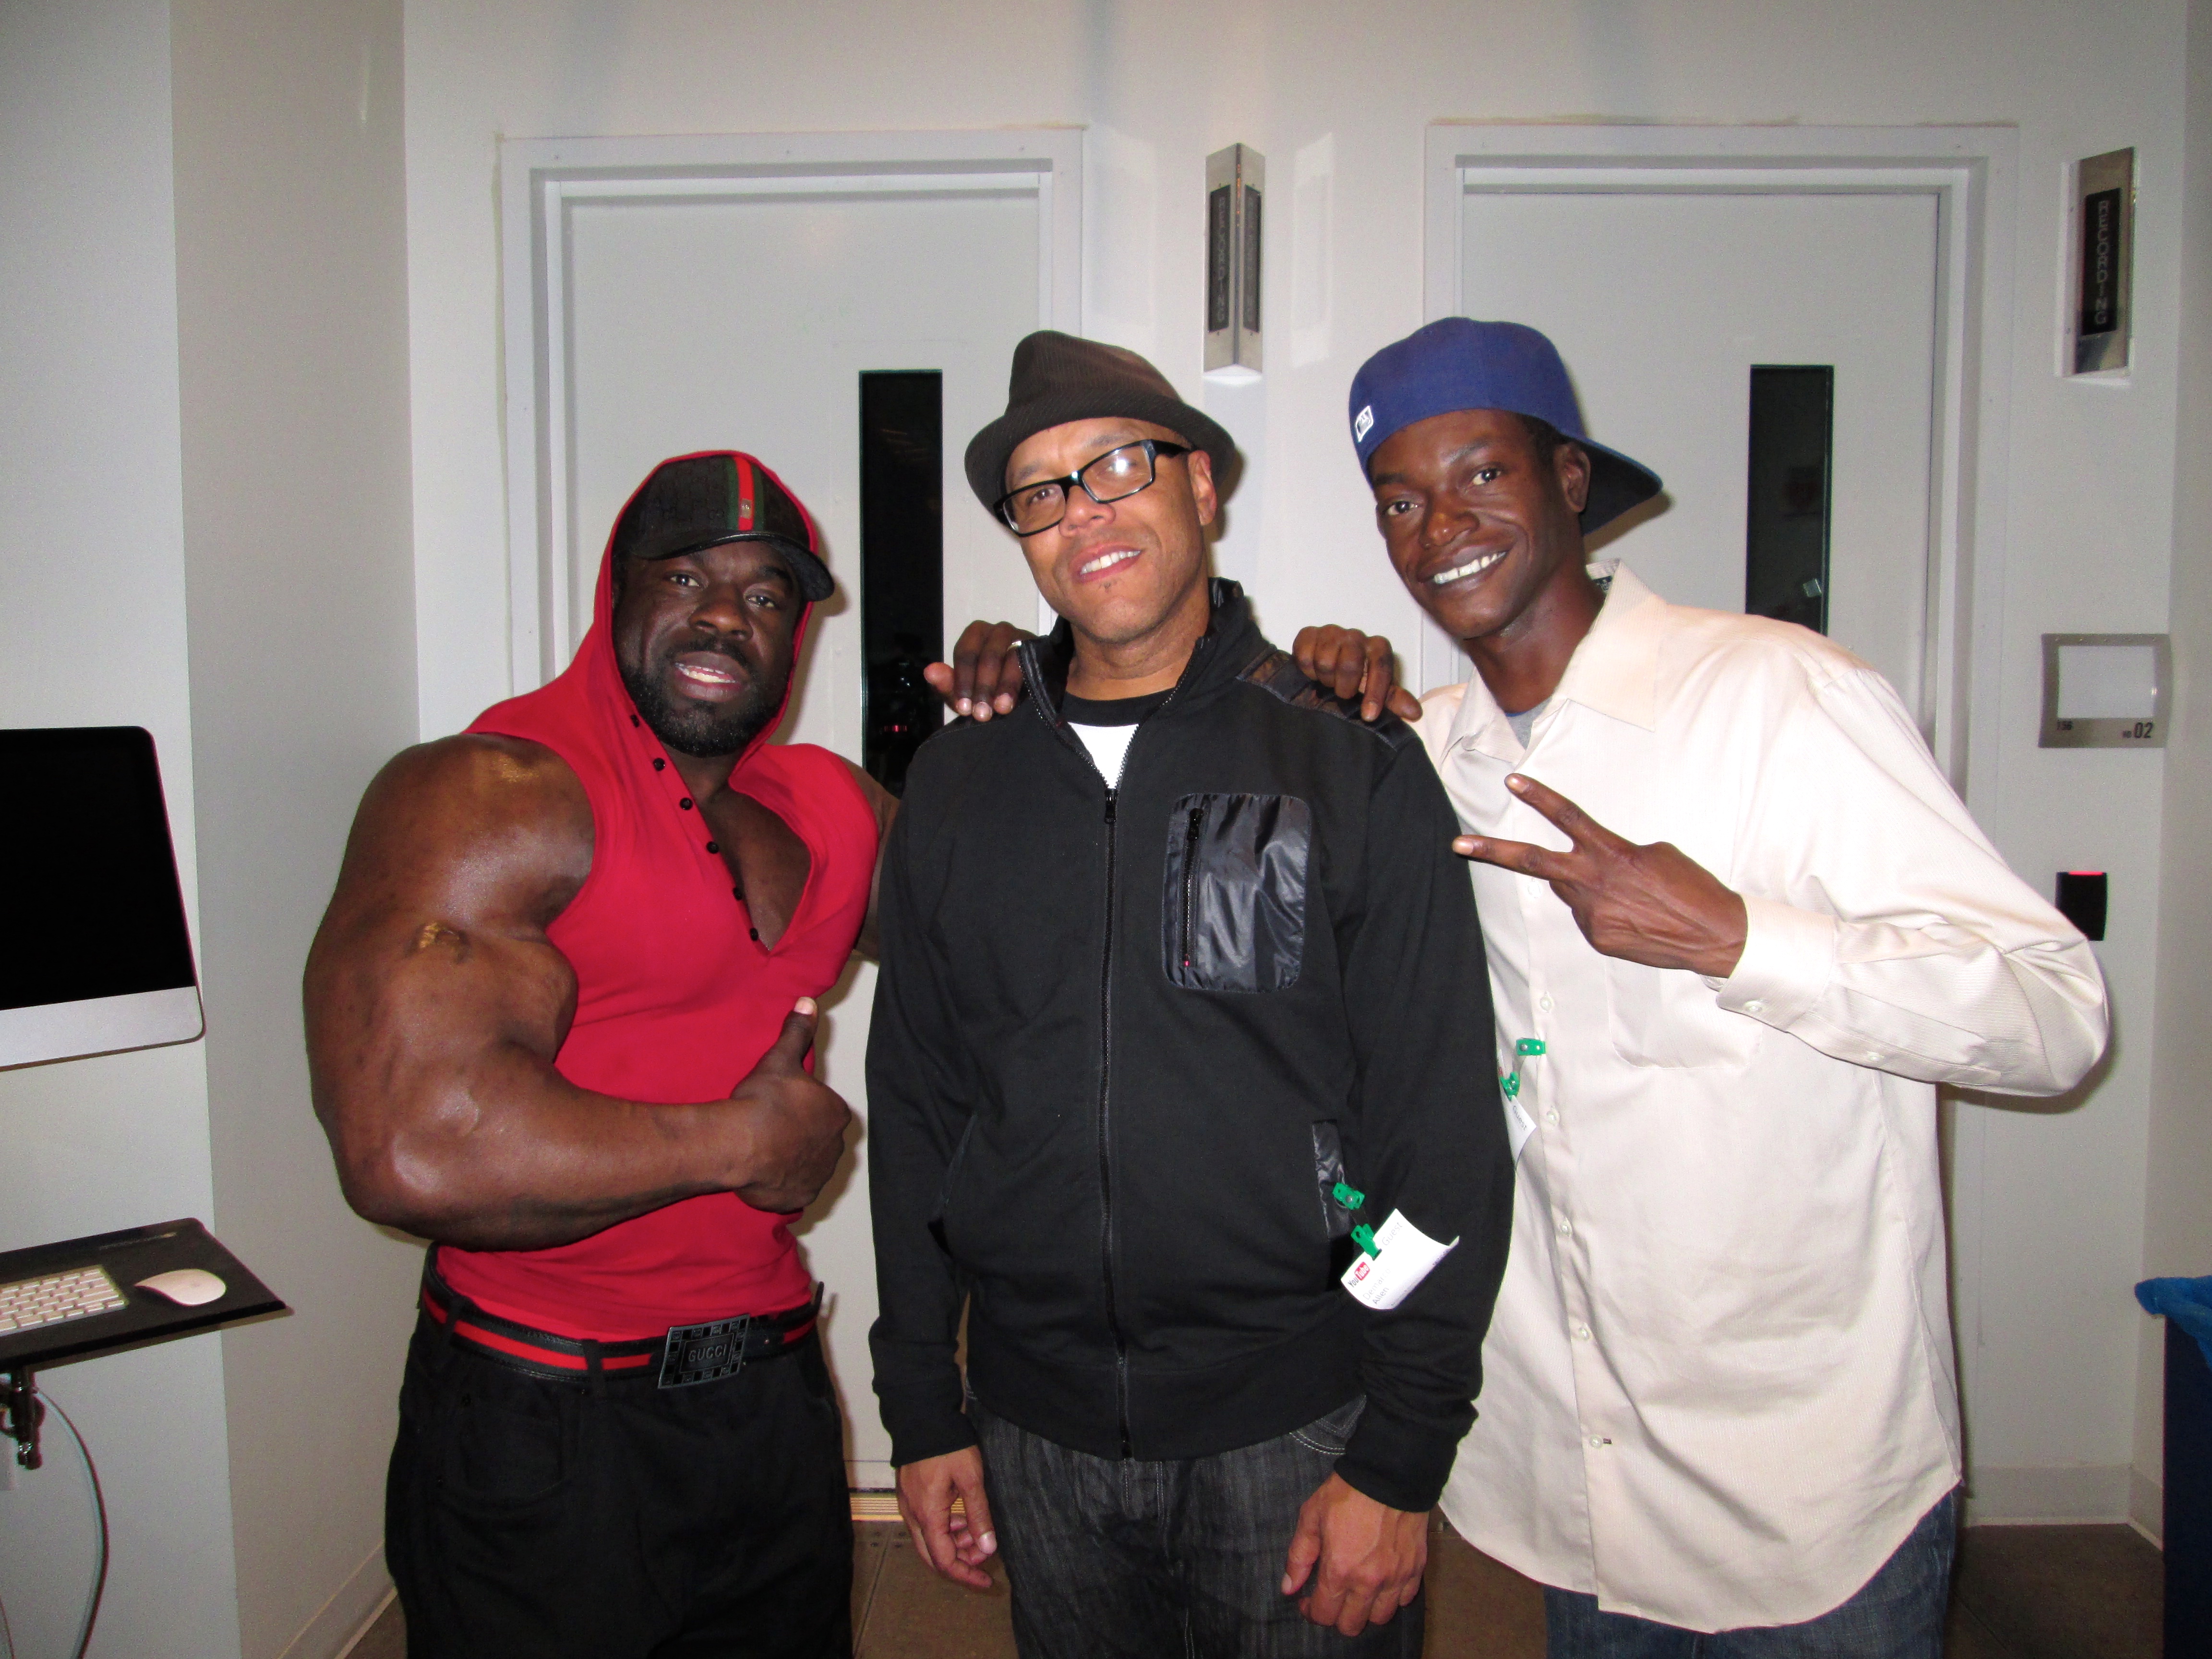 Kali Muscle, Demarco Allen and Andy Spencer